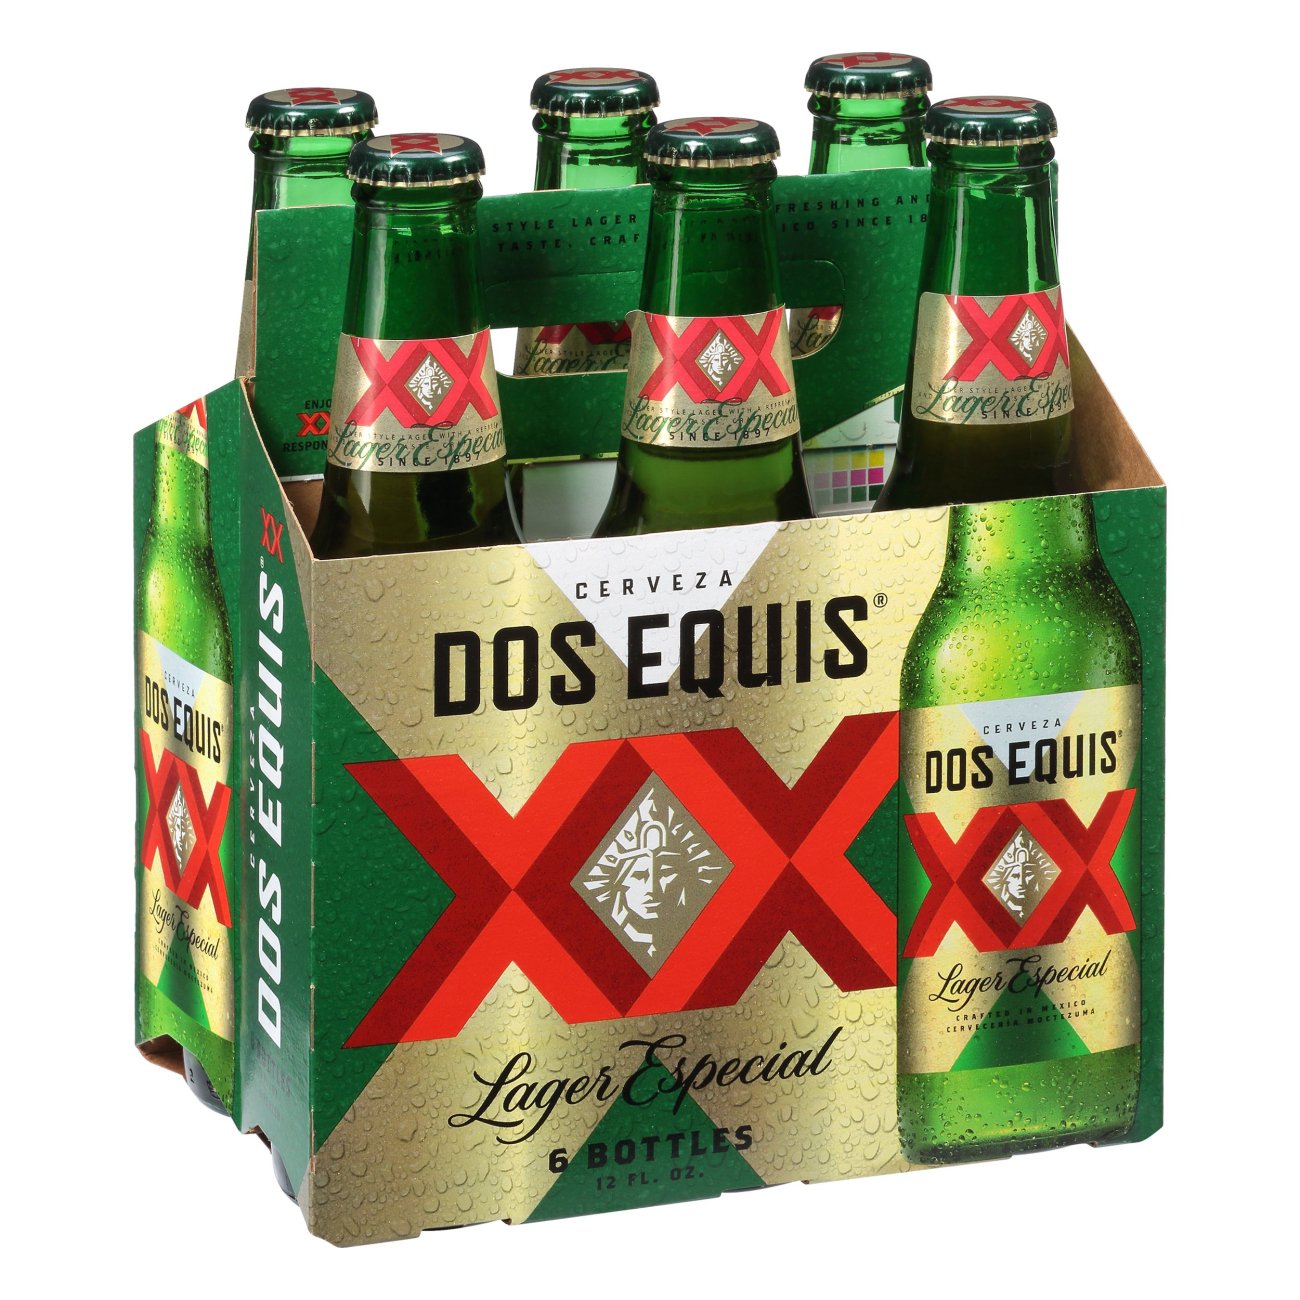 Dos Equis Lager Especial Beer 6 Pk